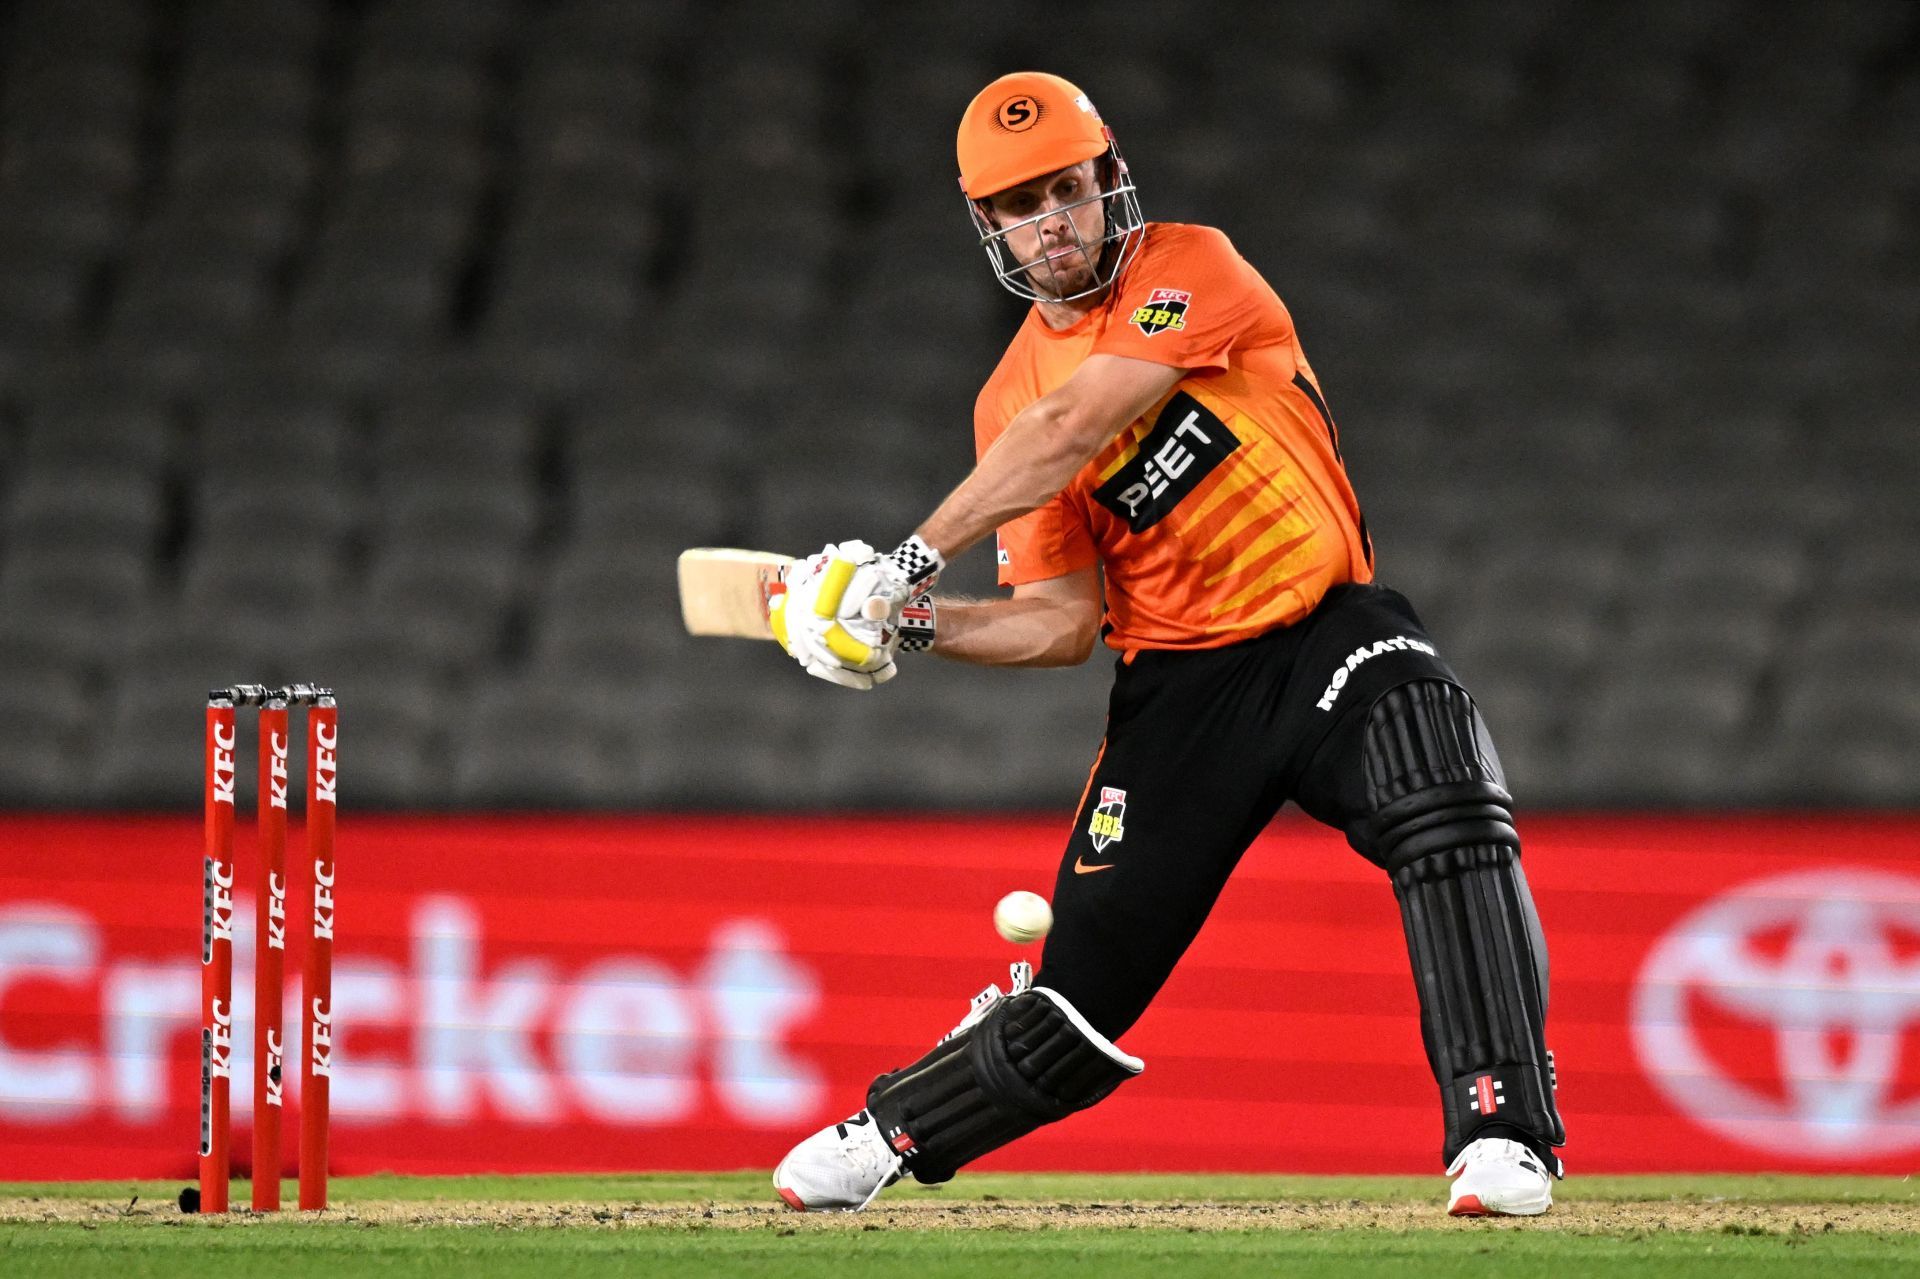 Mitchell Marsh has been in scorching form ahead of the IPL 2022 Auction.